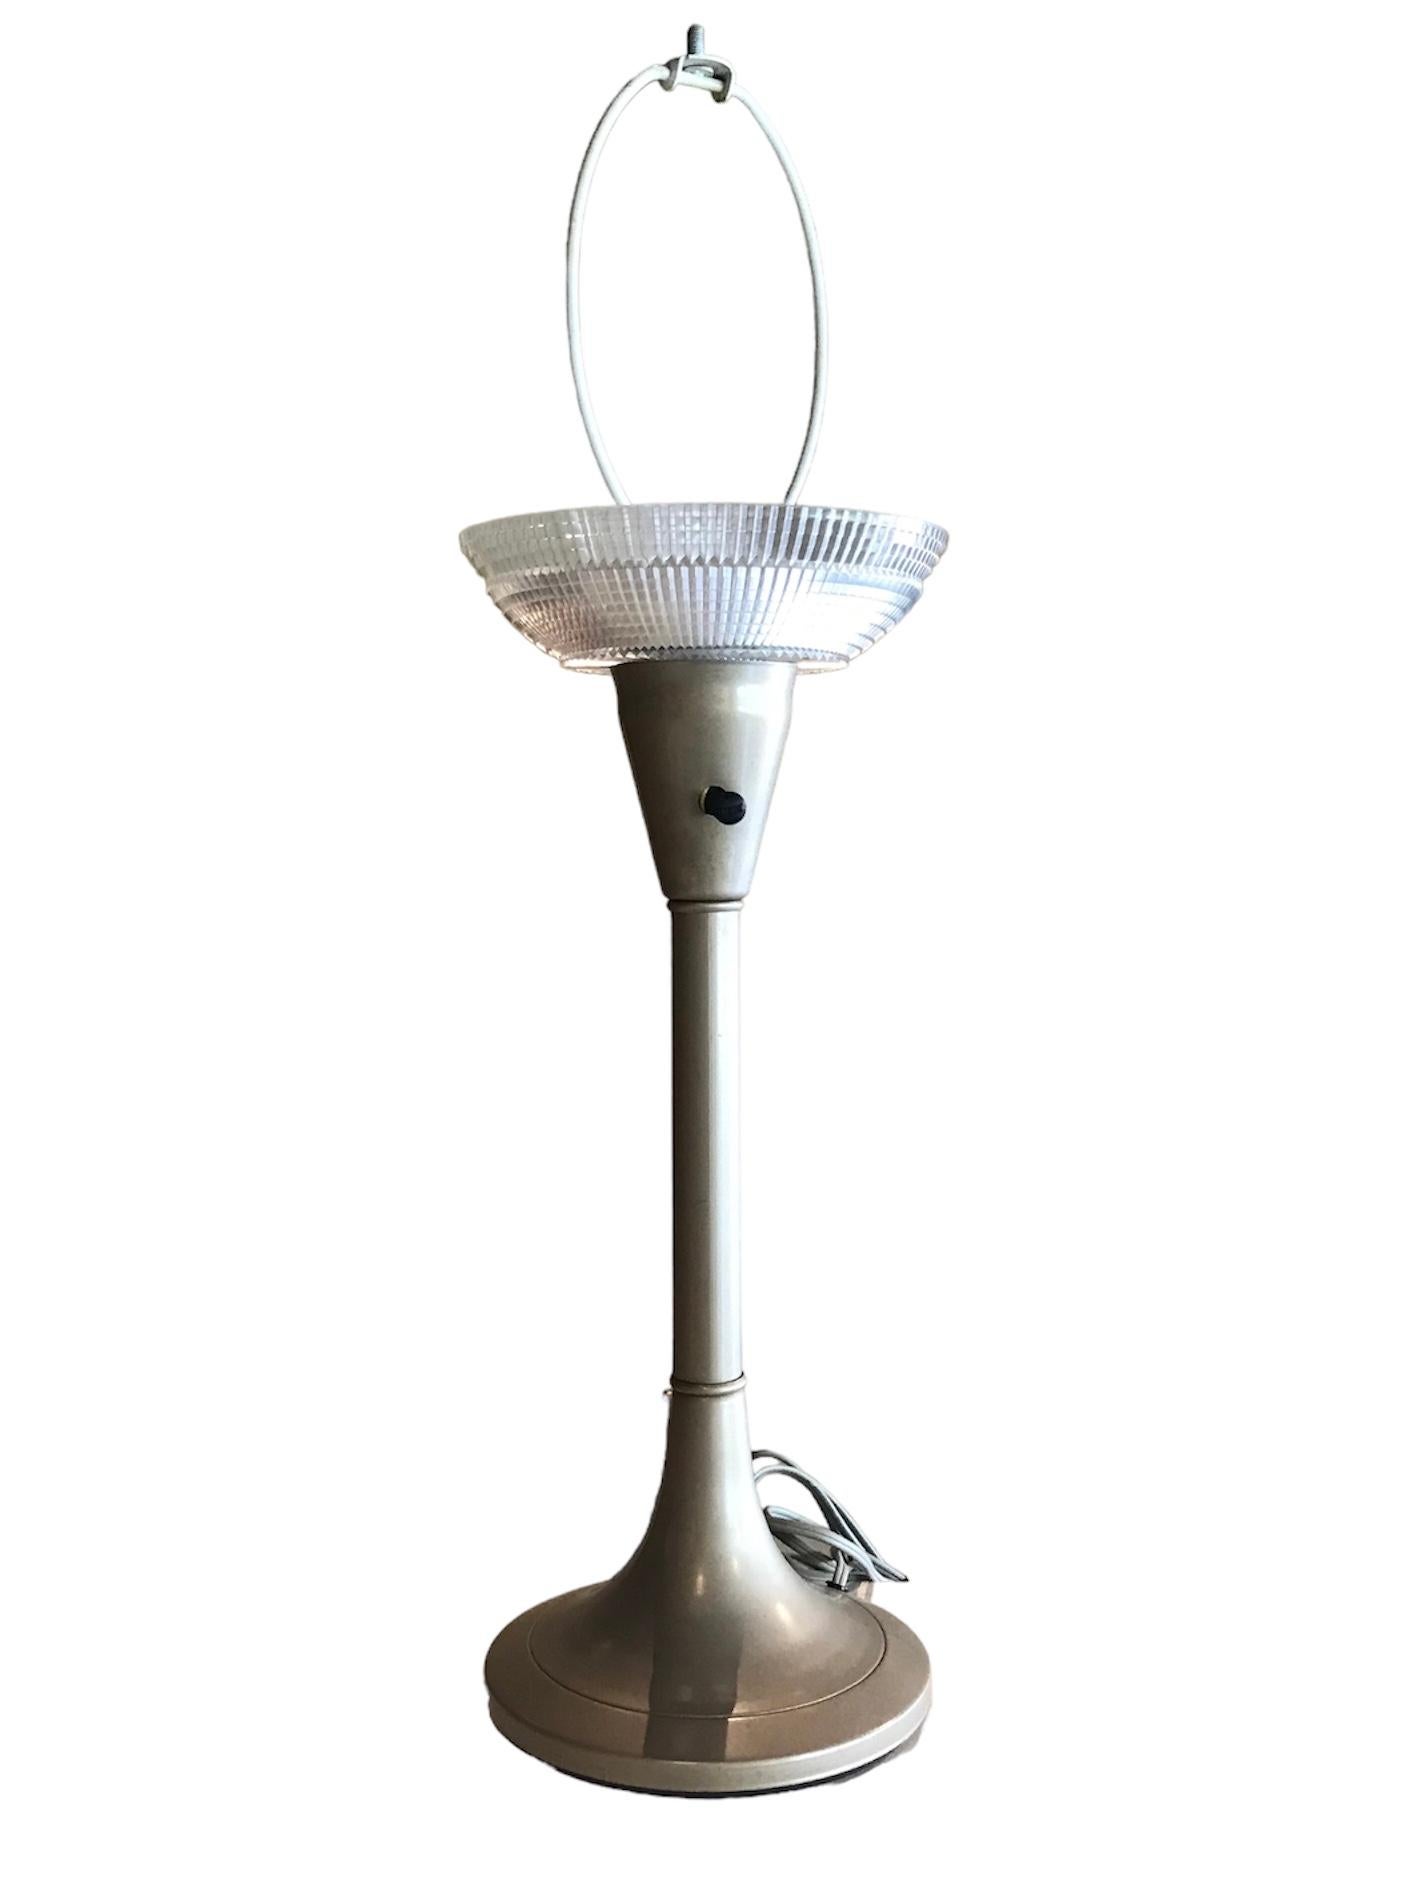 A Mid Century Modern Gerald Thurston classic design style for Lightolier Desk Lamp.  Actually could be used anywhere with it’s streamline metal tulip base body with a built in cut crystal style clear plastic difusser.  Original wiring and socket. 